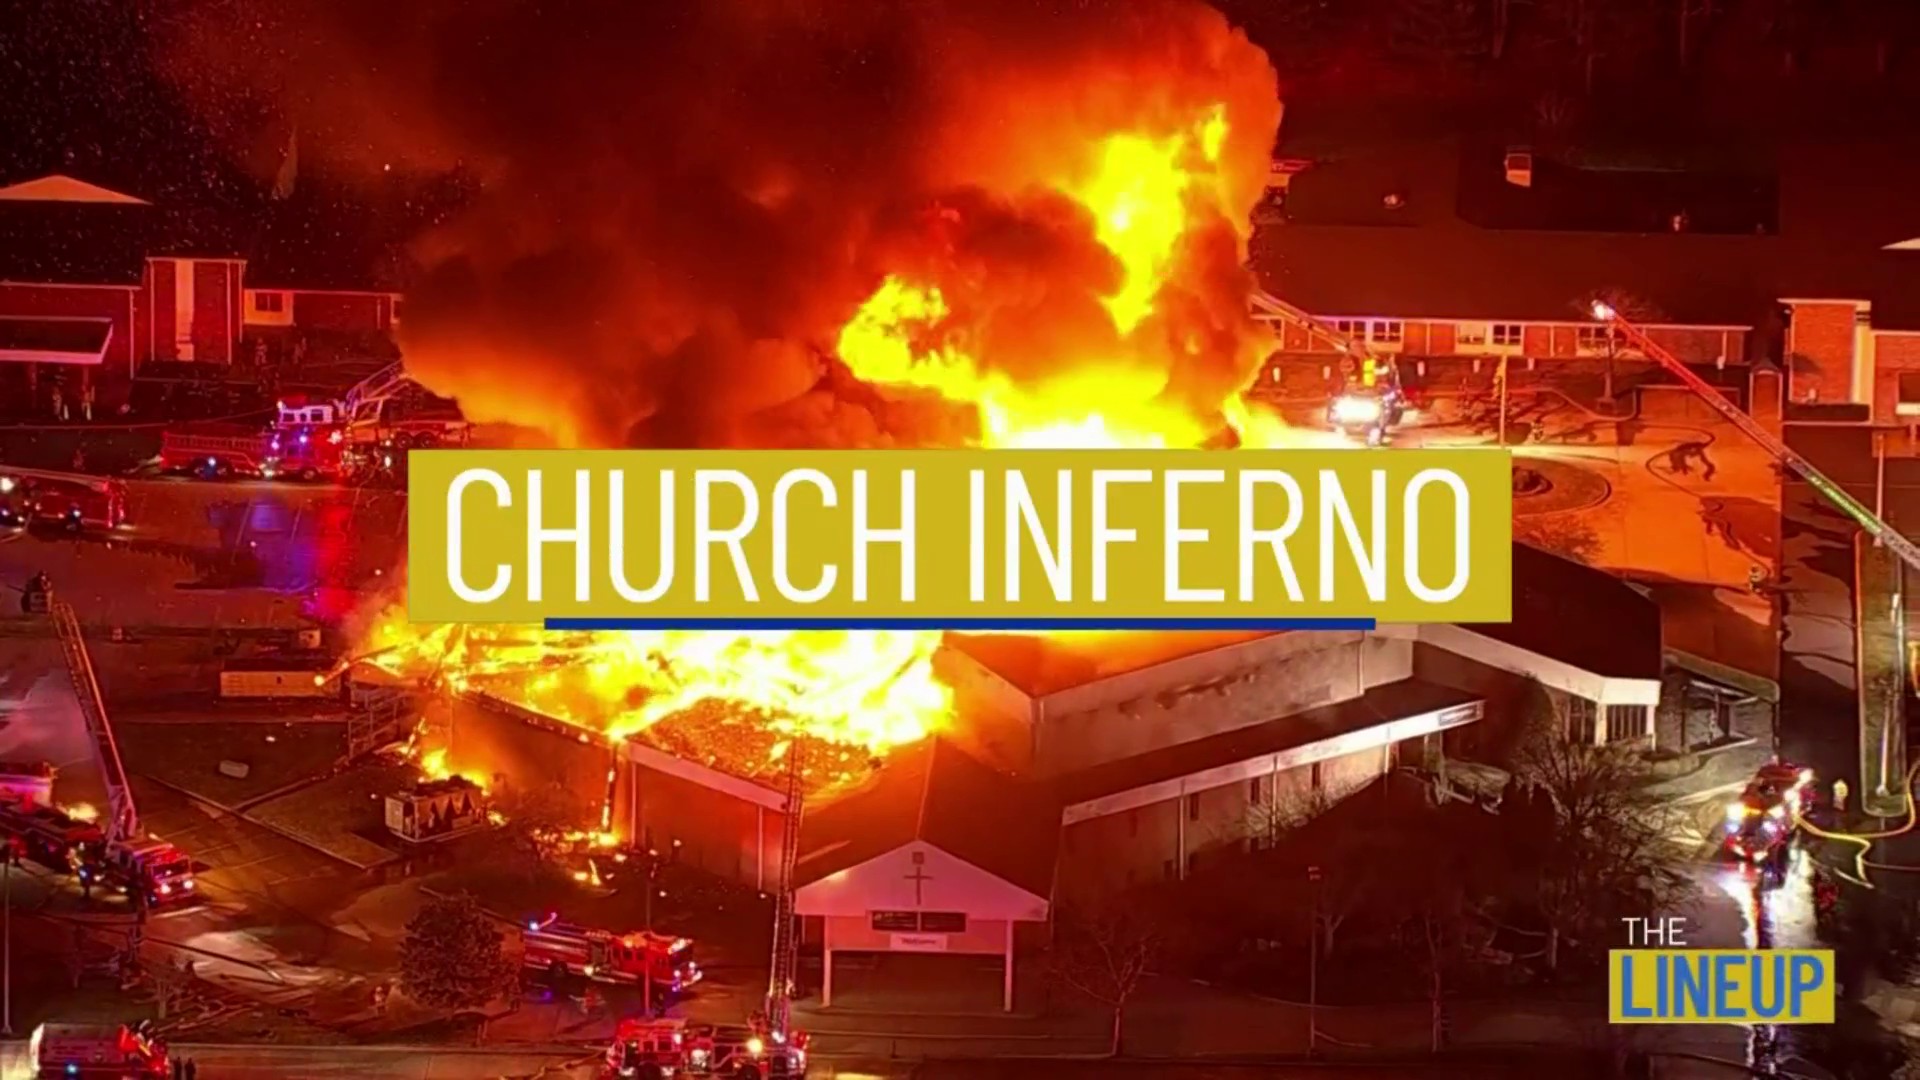 Church Inferno in NJ The Lineup